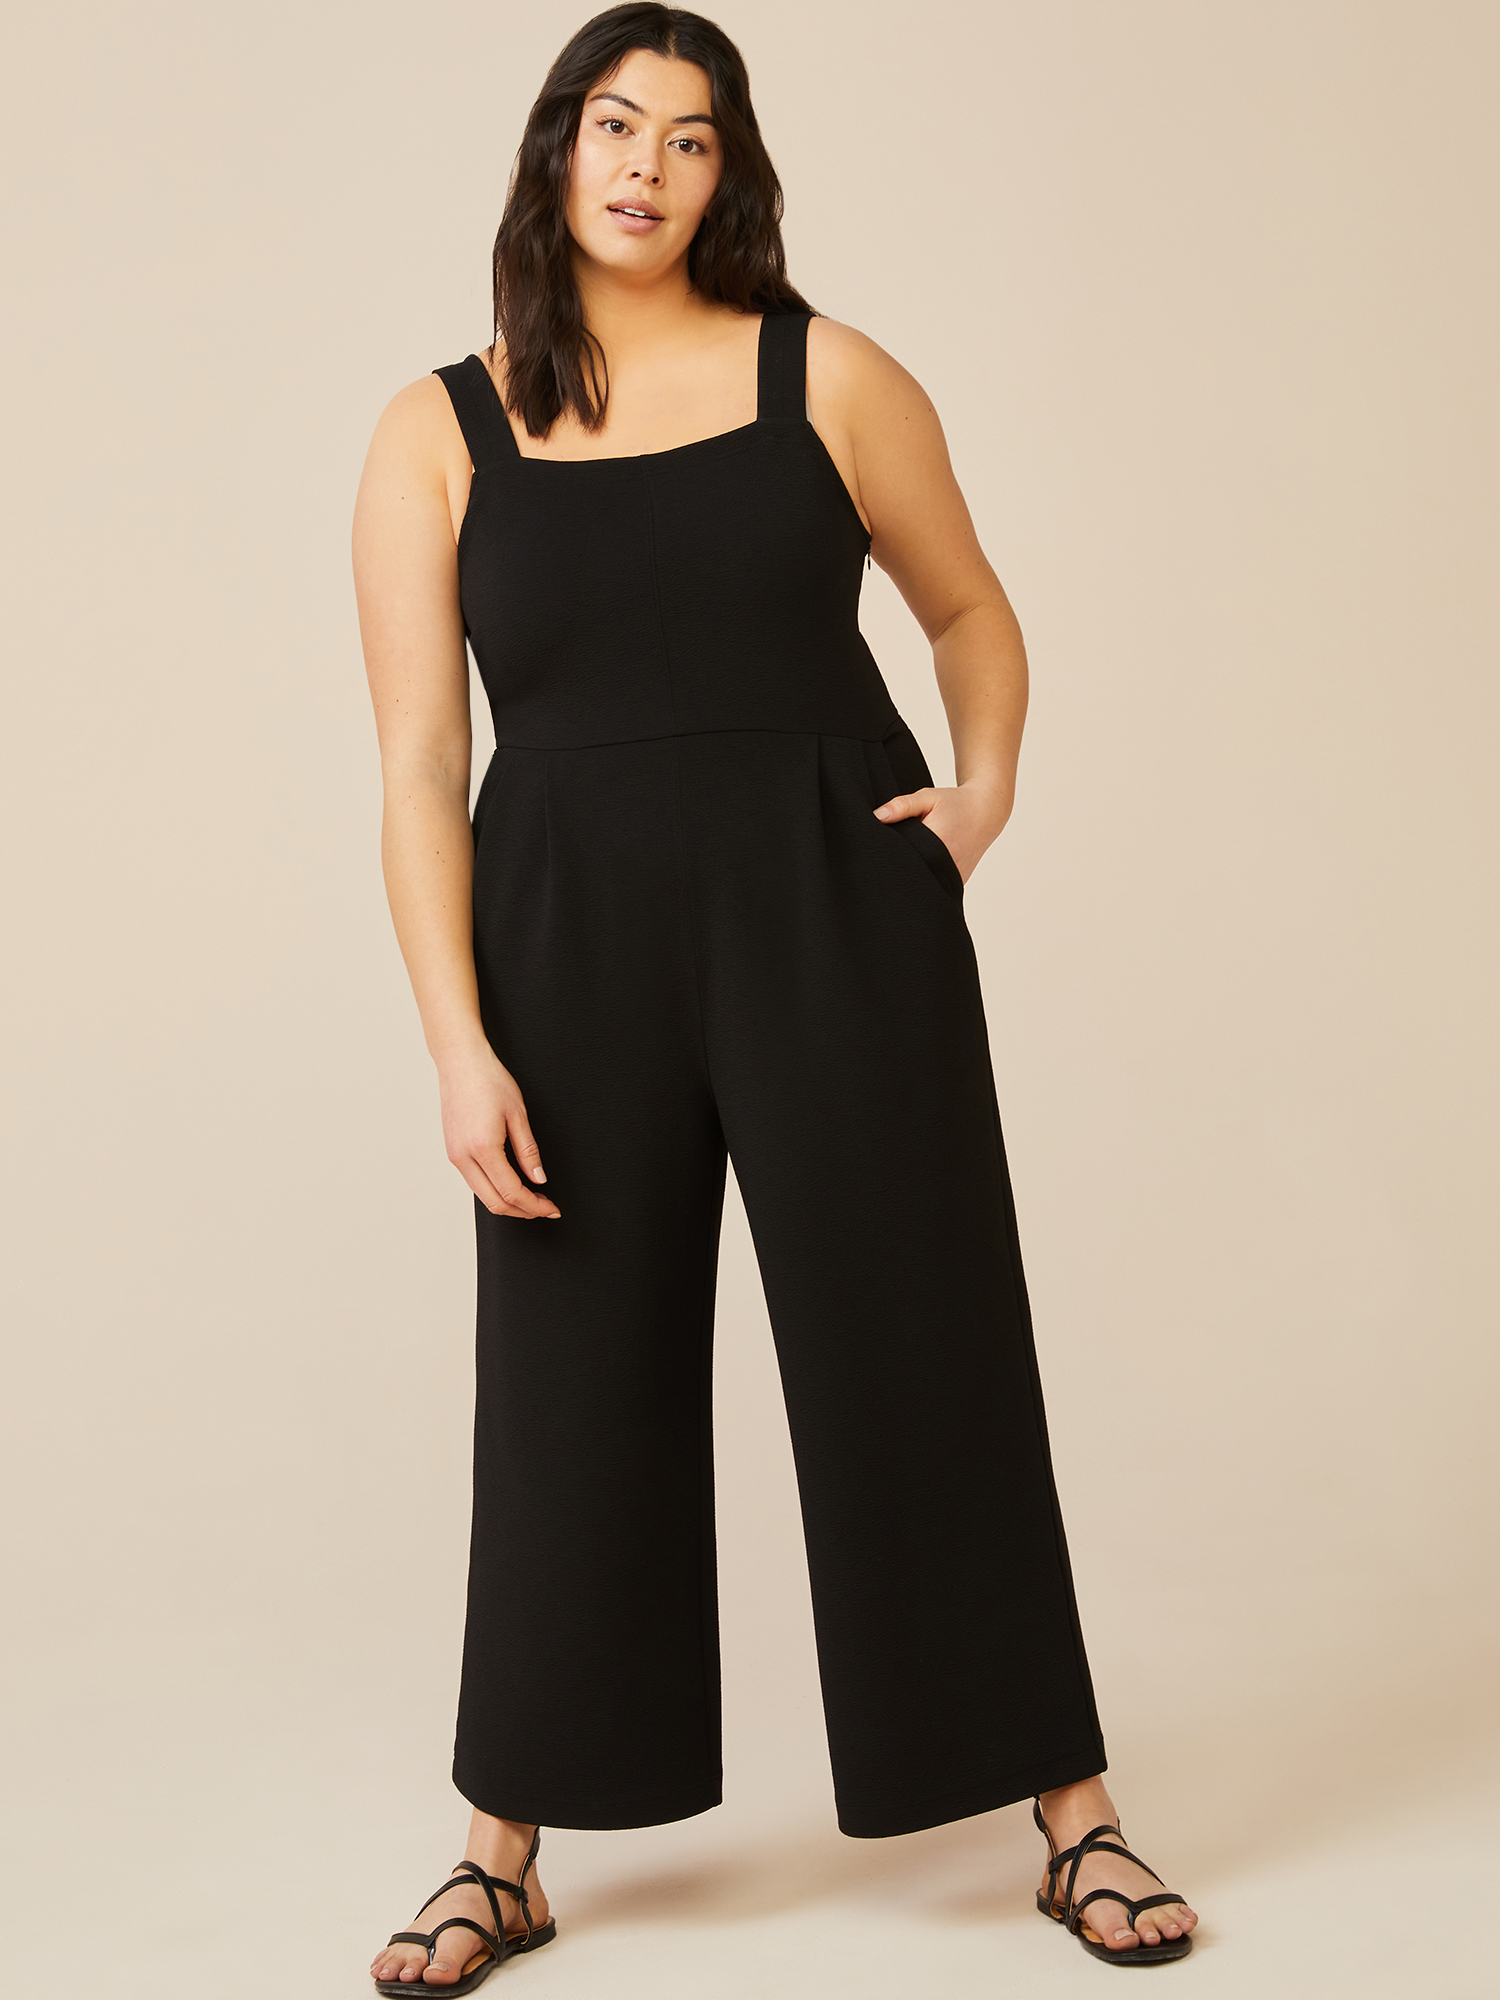 Free Assembly Women’s Wide Leg Playsuit - image 3 of 6